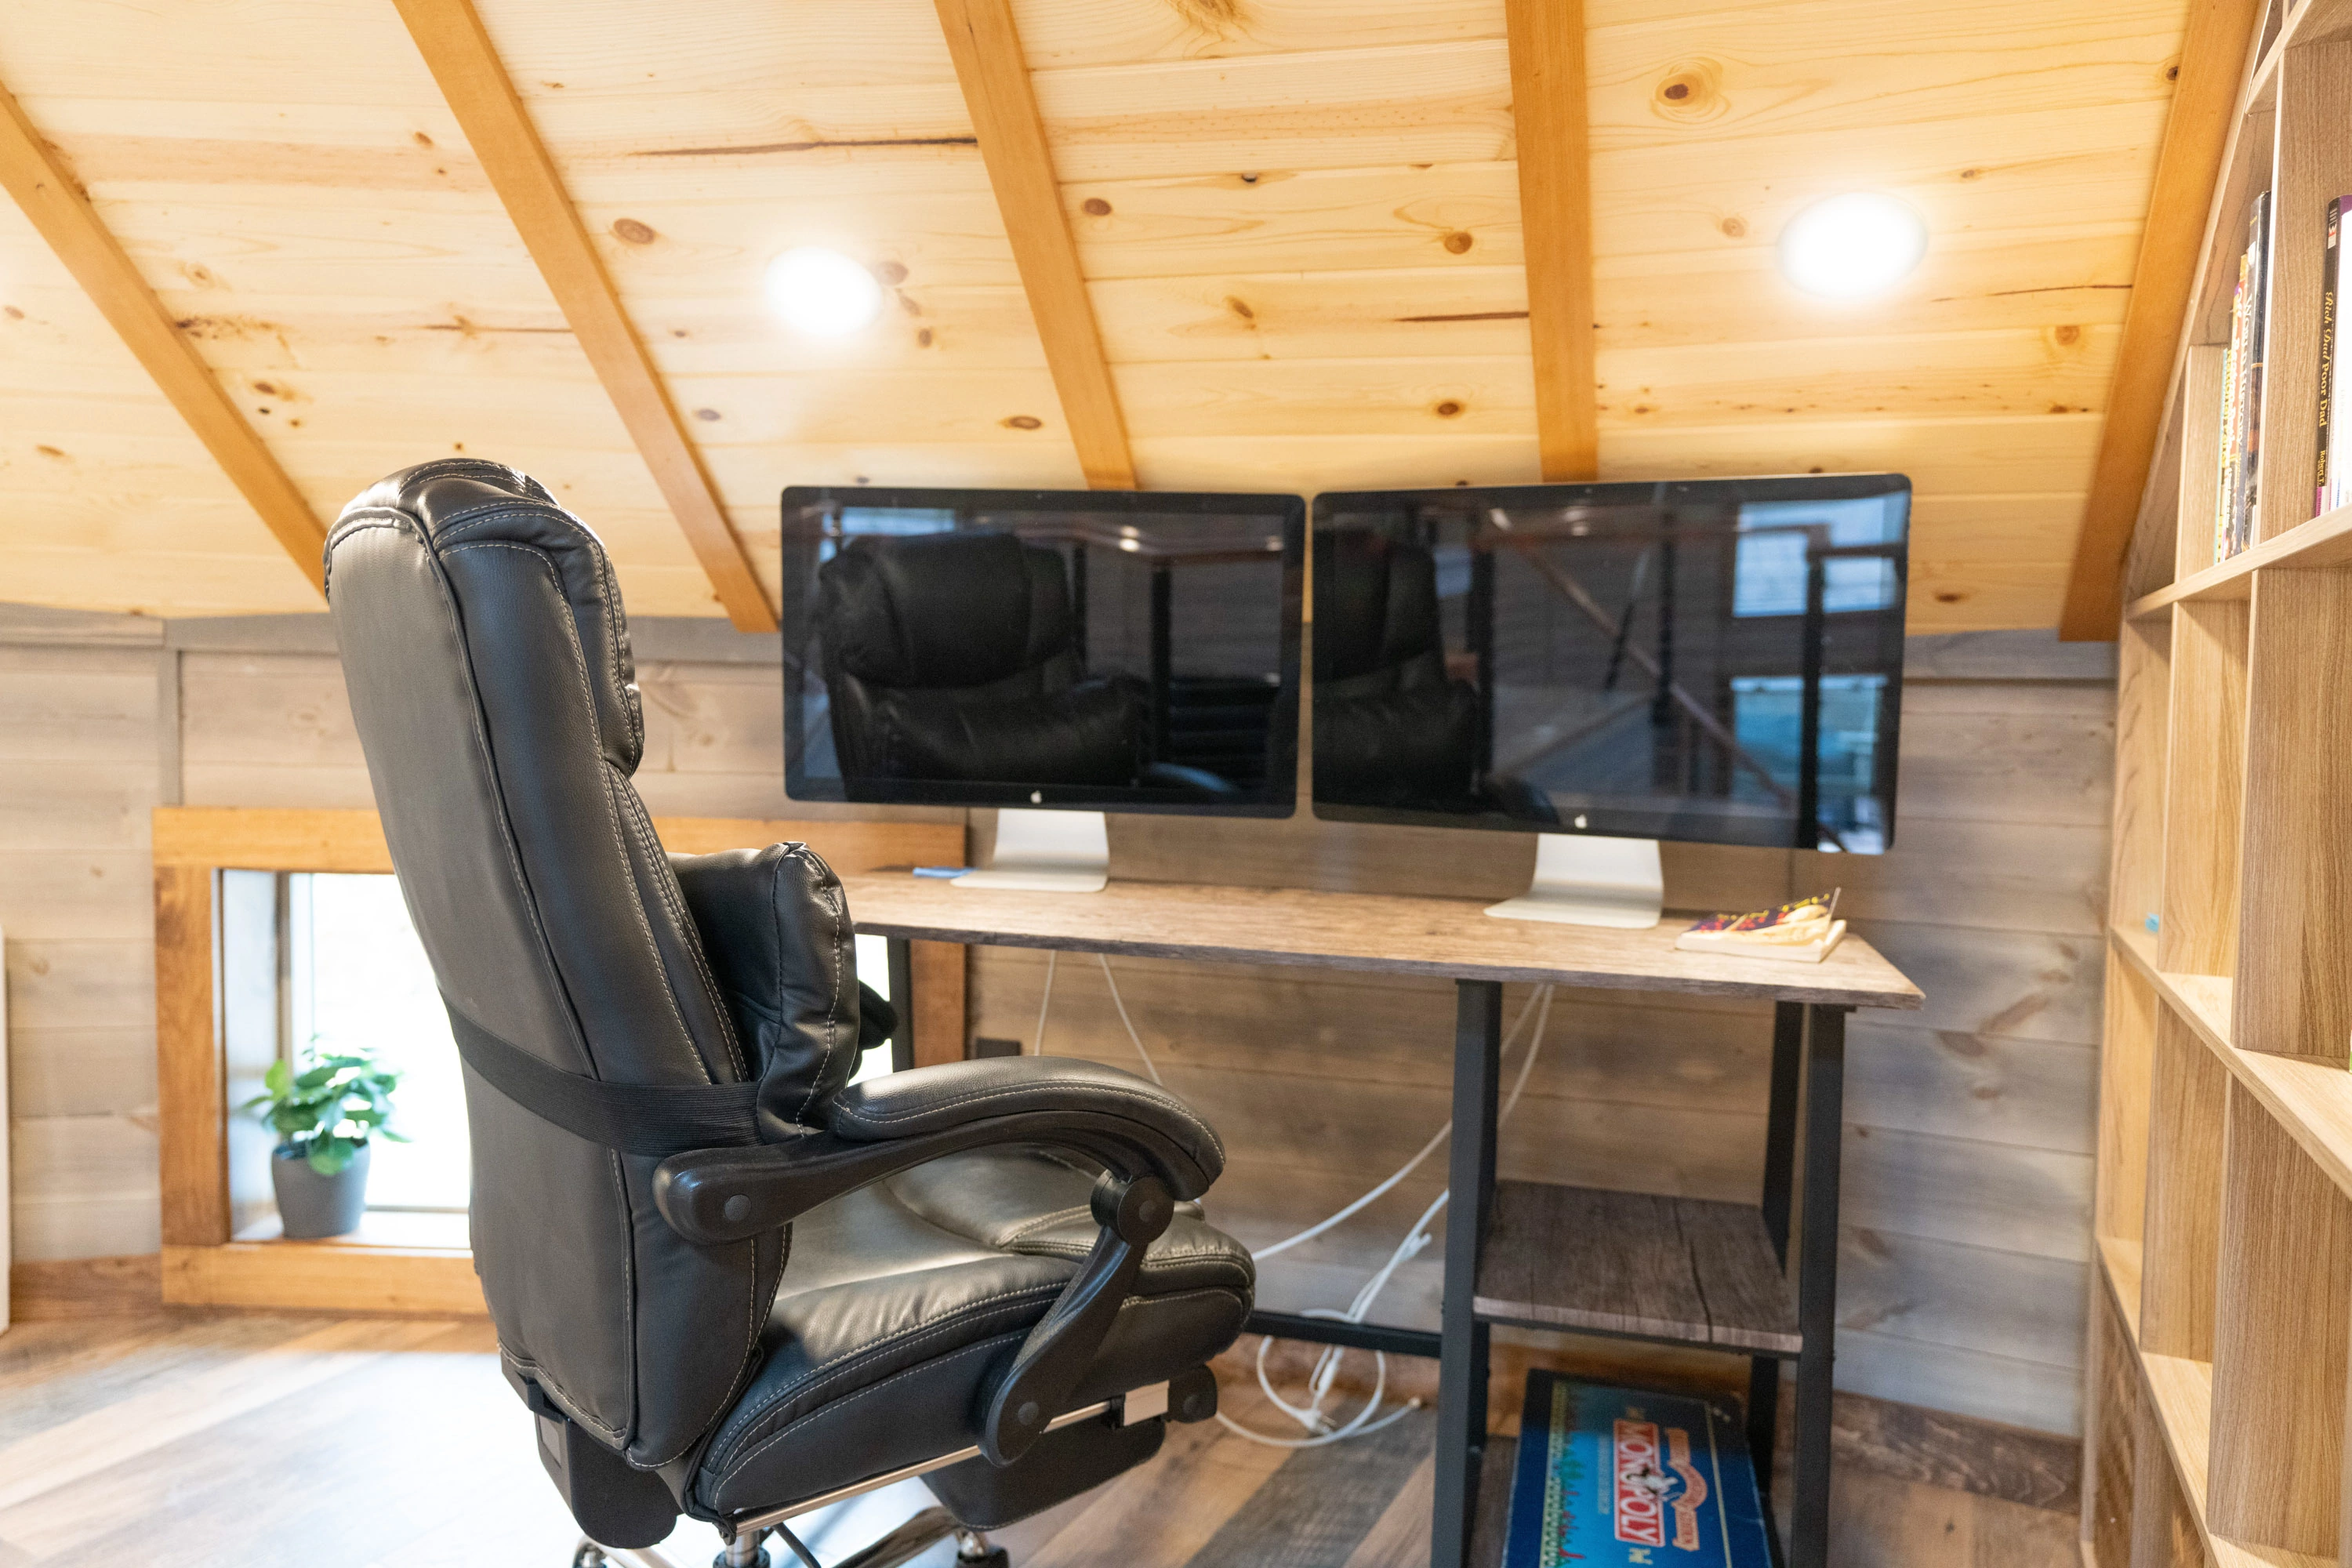 <span  class="uc_style_uc_tiles_grid_image_elementor_uc_items_attribute_title" style="color:#ffffff;">Dedicated workspace with two Apple monitors and a comfortable reclining chair</span>